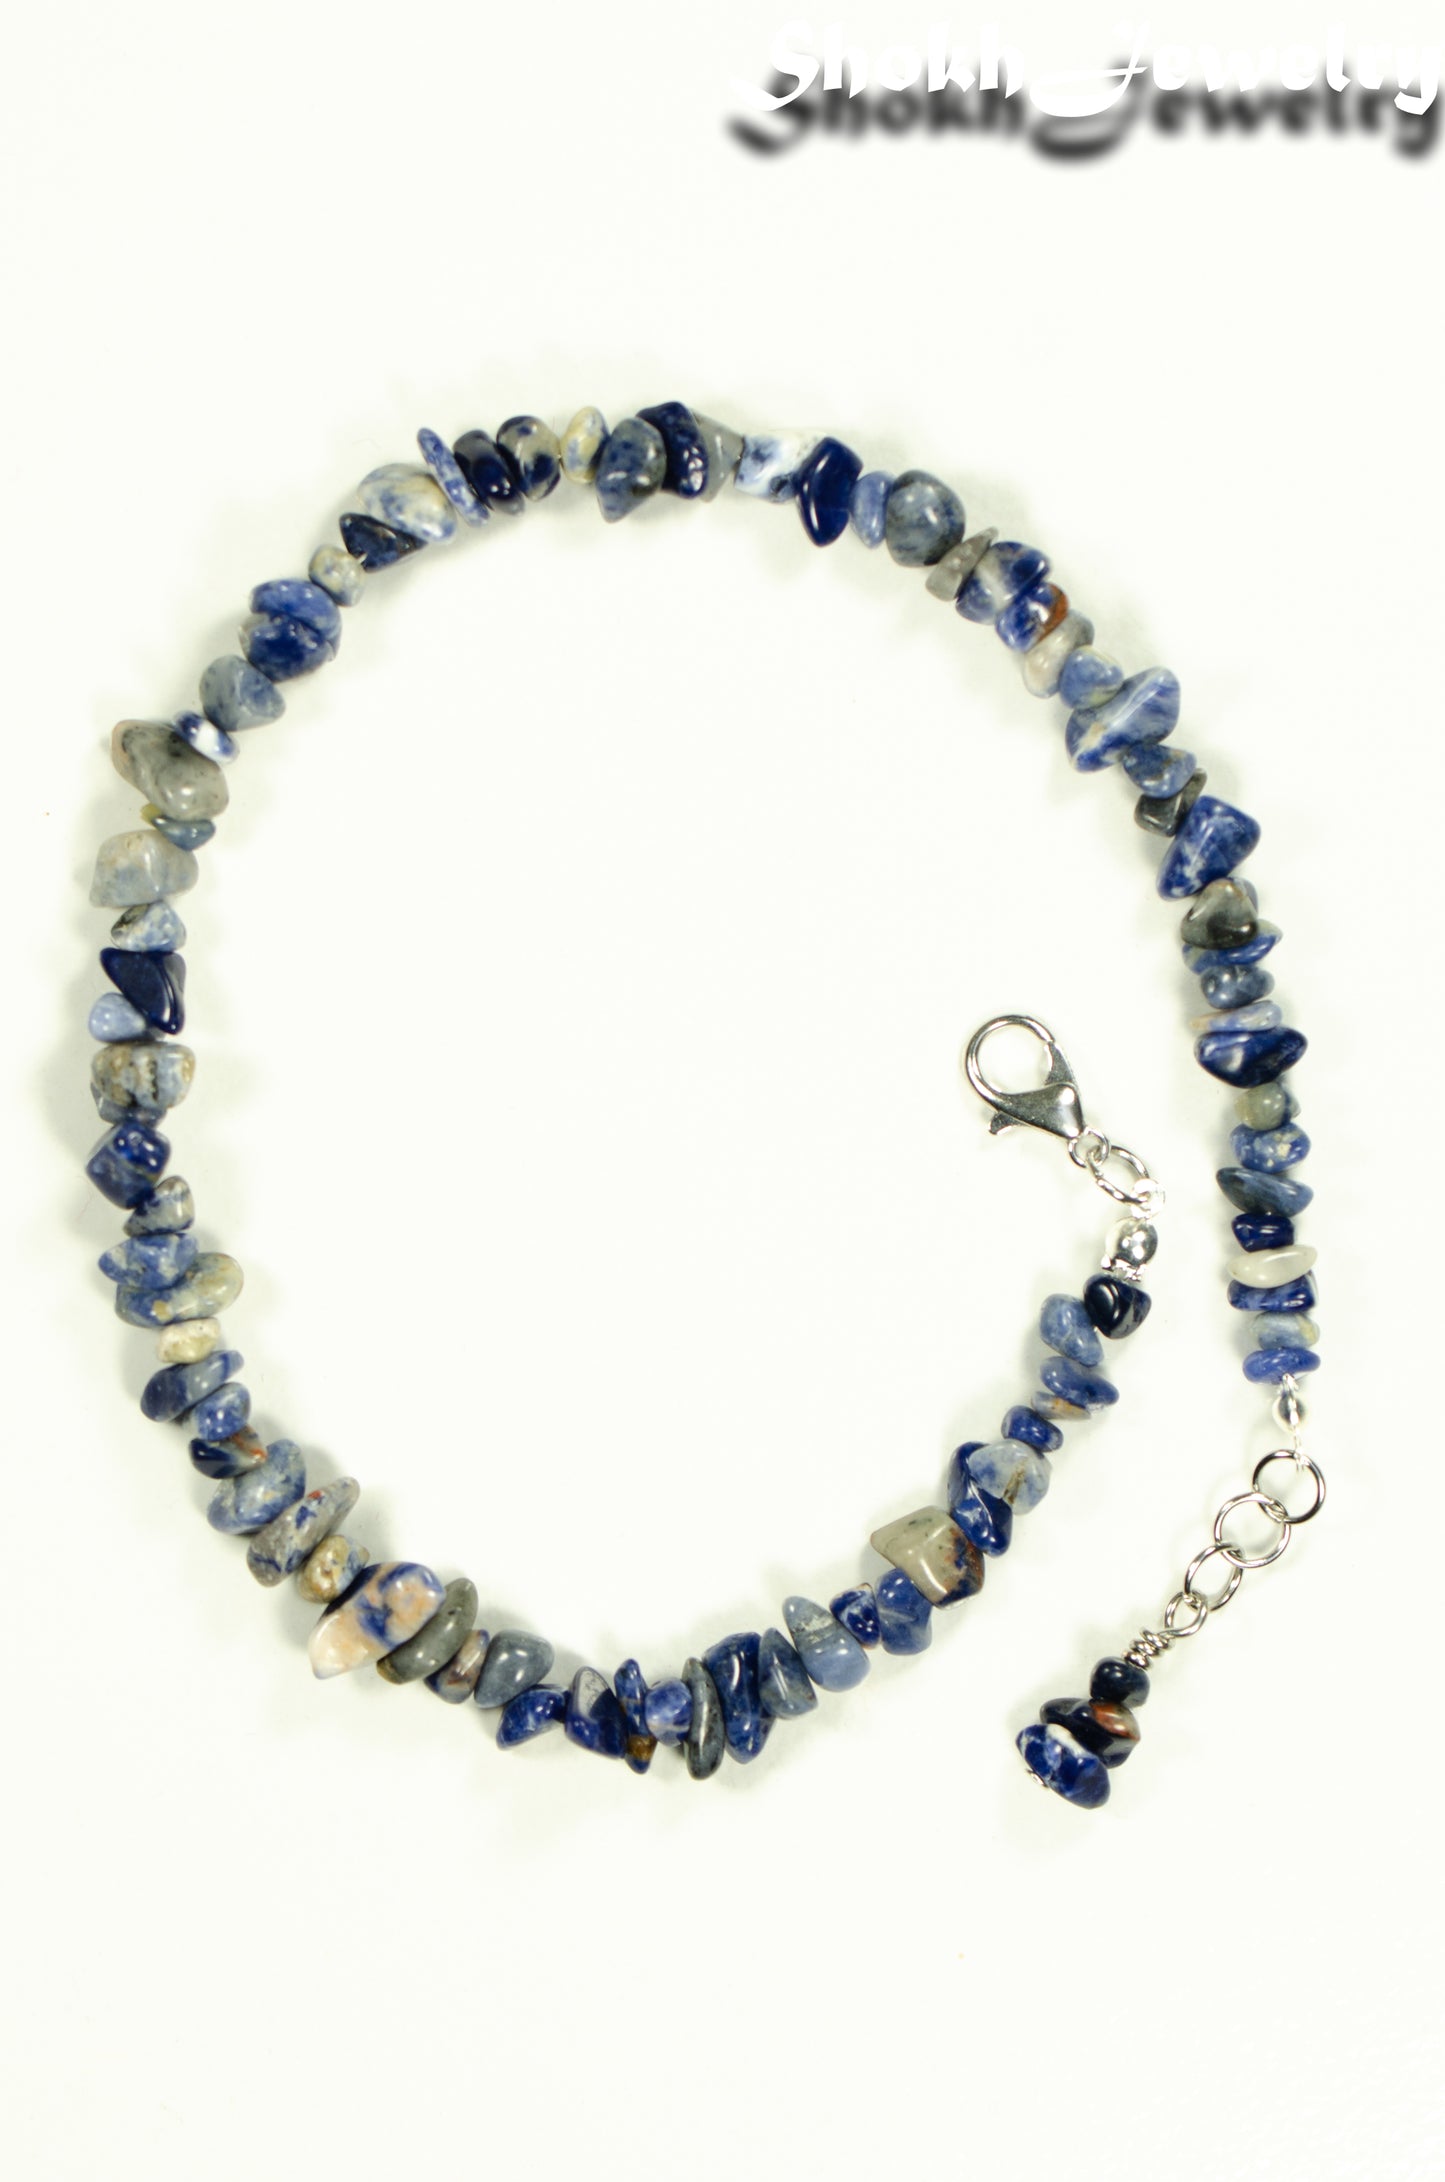 Top view of Natural Sodalite Crystal Chip Choker Necklace.